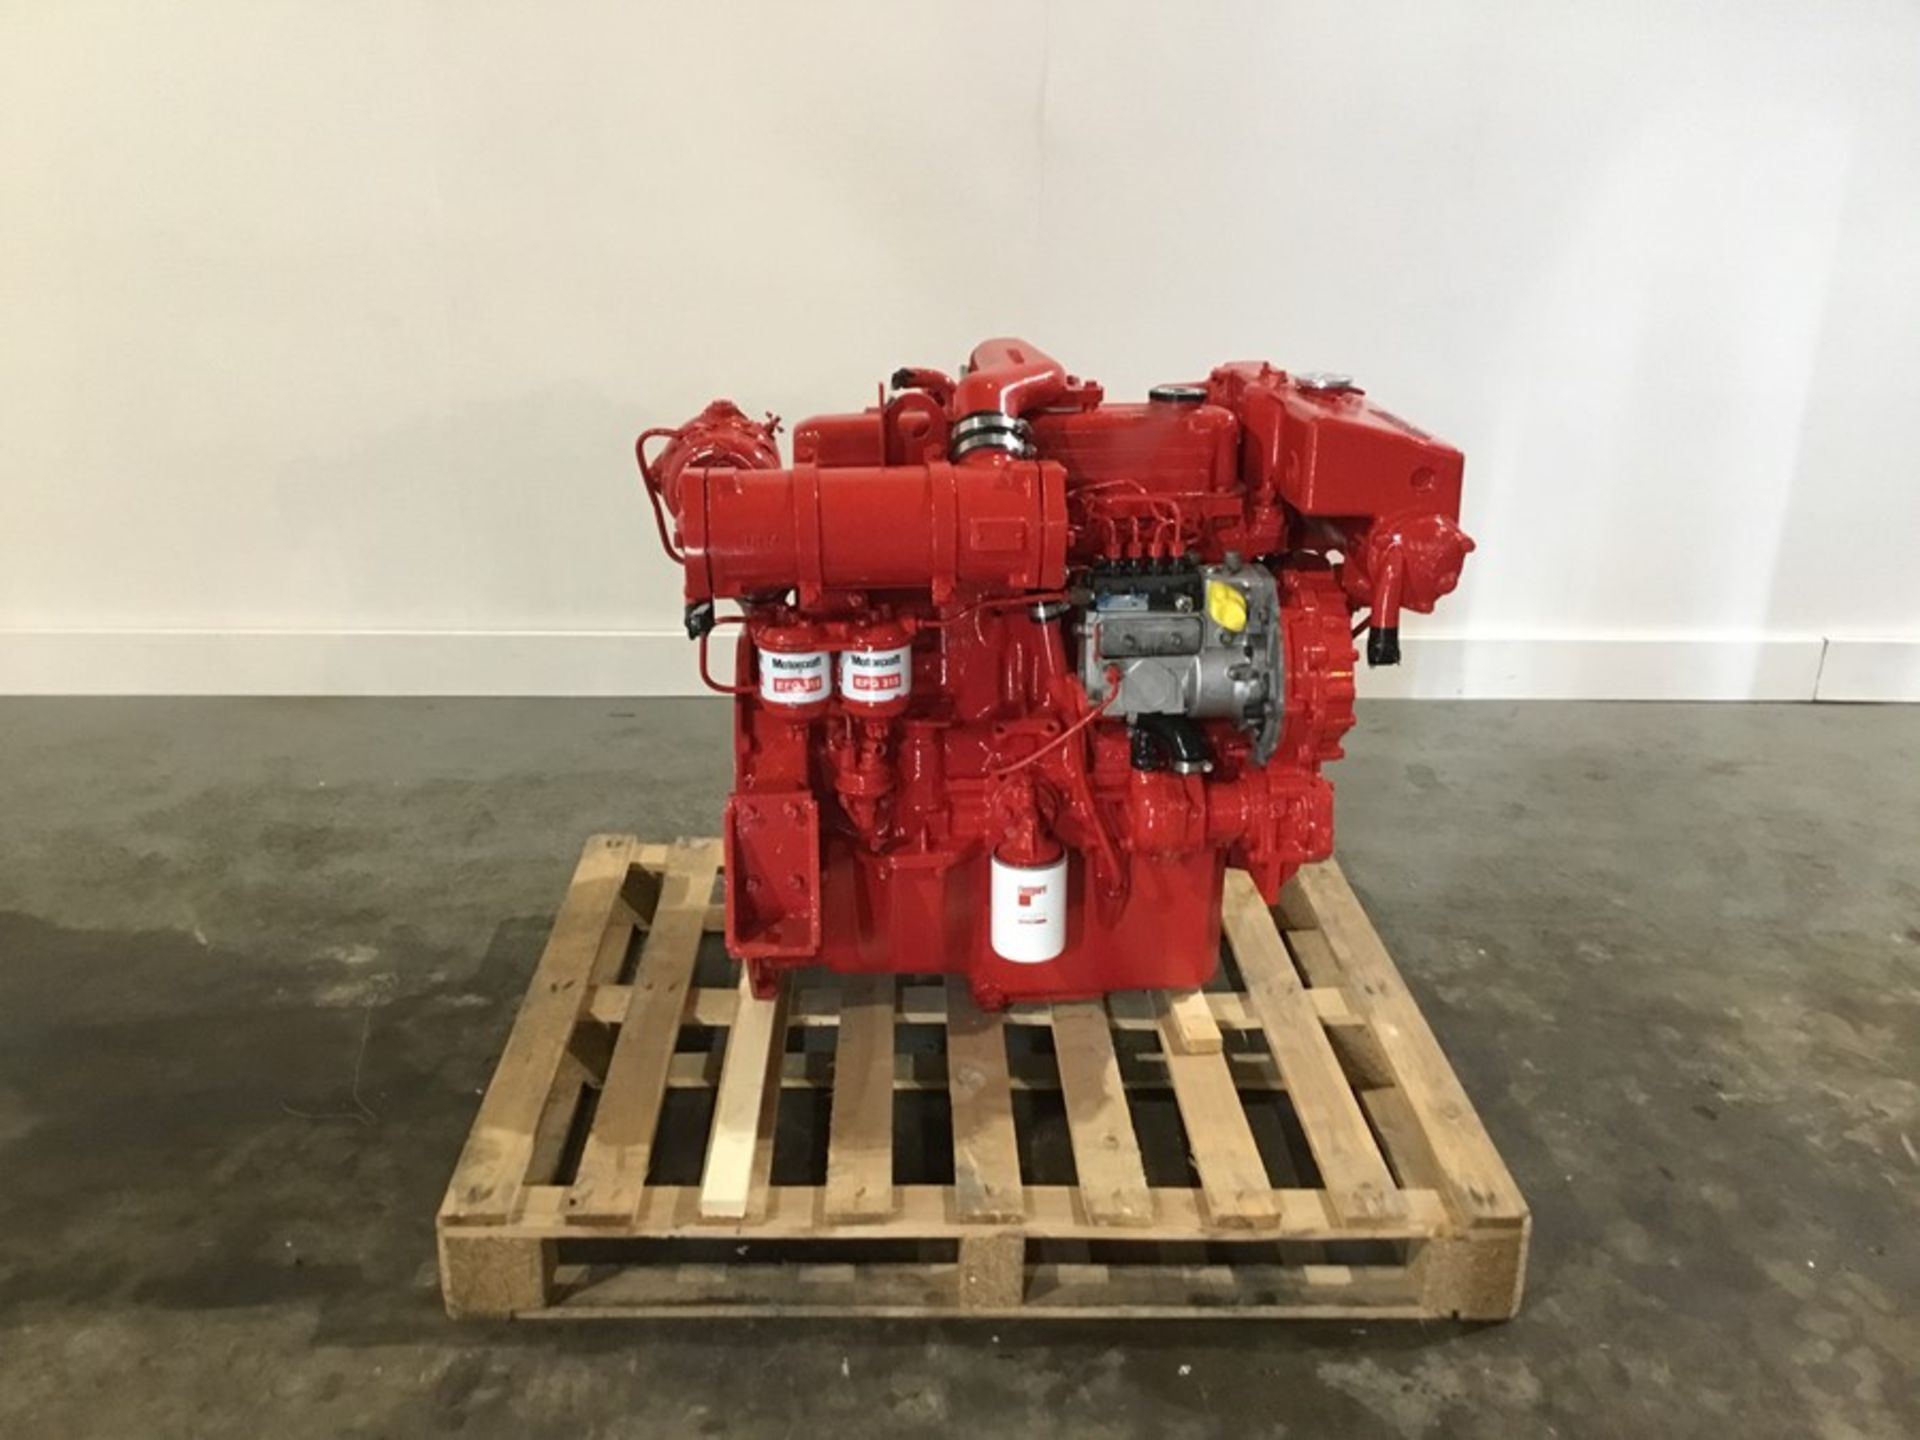 Ford 2722E Marine Diesel engine: Ford 2722e 4cyl Turbo 140Hp @2500Rpm used low hours - Image 5 of 18